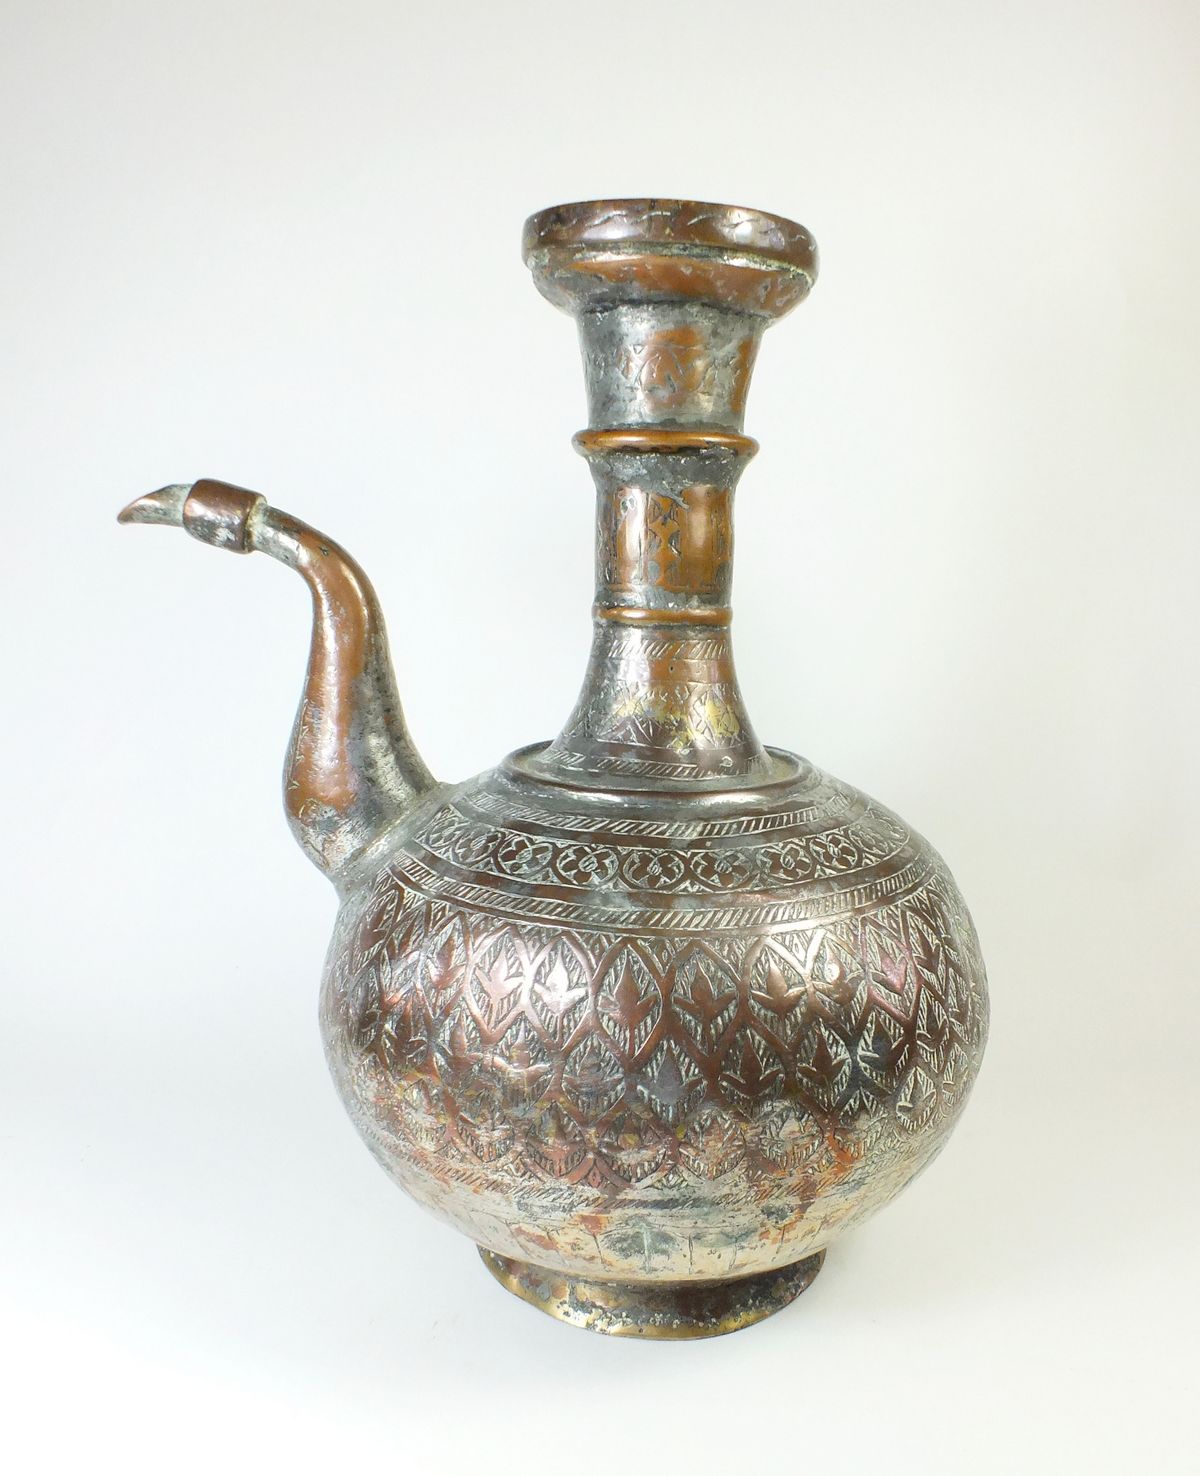 A 19th century Persian or Afghan Islamic tinned copper aftaba/water pot, 29cm tall - Image 2 of 2